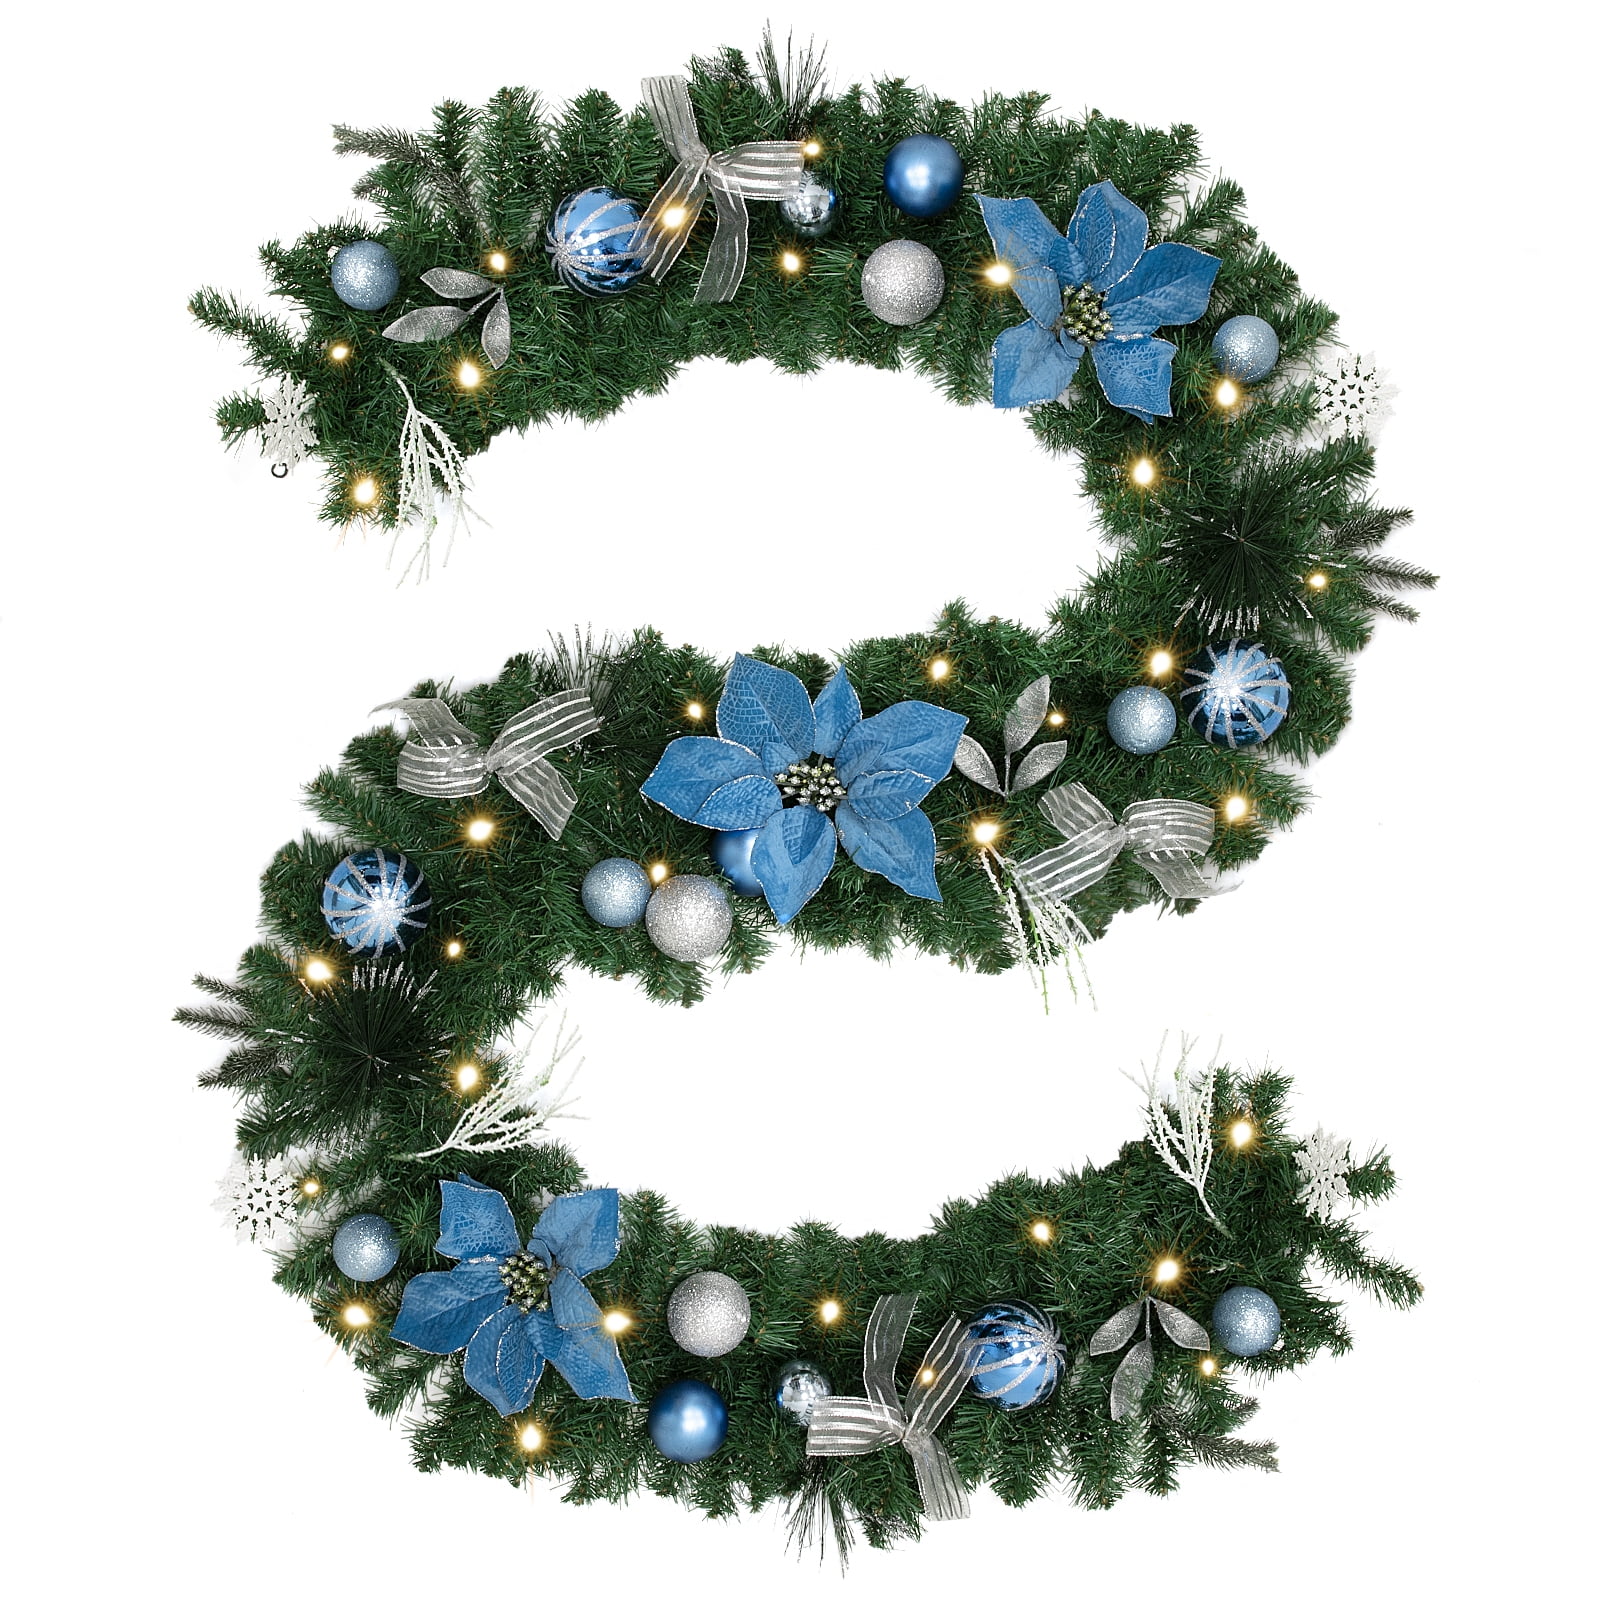 Ribbons and Flowers Snowflakes Valery Madelyn Pre-Lit 6 Feet/72 Inch Winter Land Blue Silver Christmas Garland with Ball Ornaments Battery Operated 20 LED Lights Pine Cones